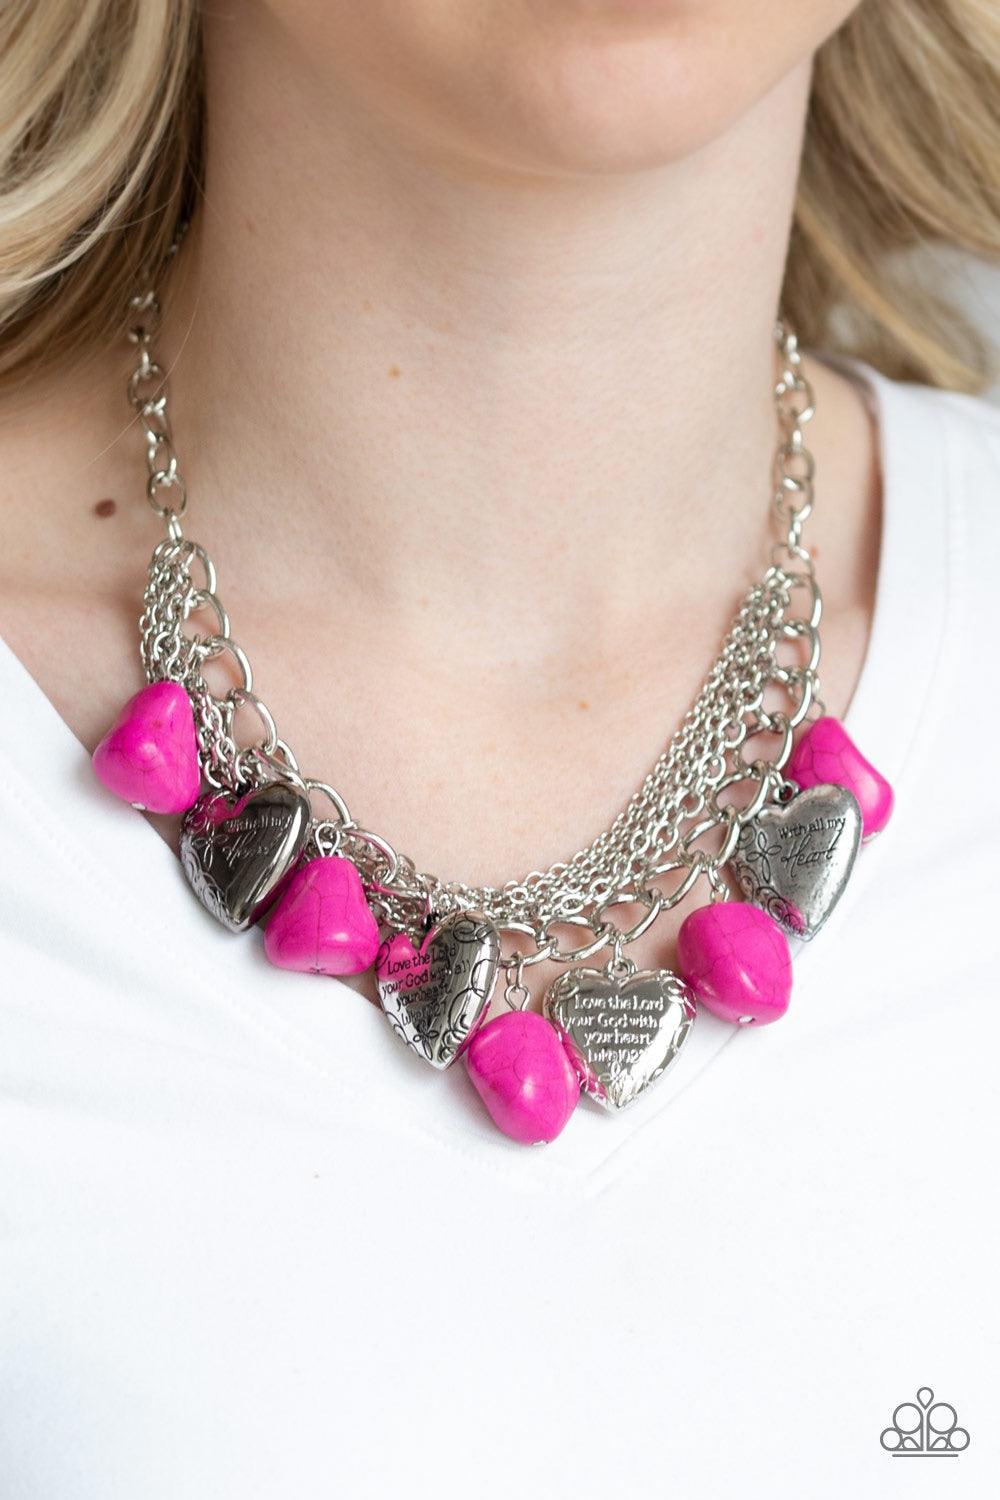 Paparazzi Accessories Change of Heart - Pink Pink faux rocks alternate with heart charms along a chunky silver chain. Hearts are inscribed with the phrase "With All My Heart" on one side and a short bible verse on the other that reads, "Love the Lord thy